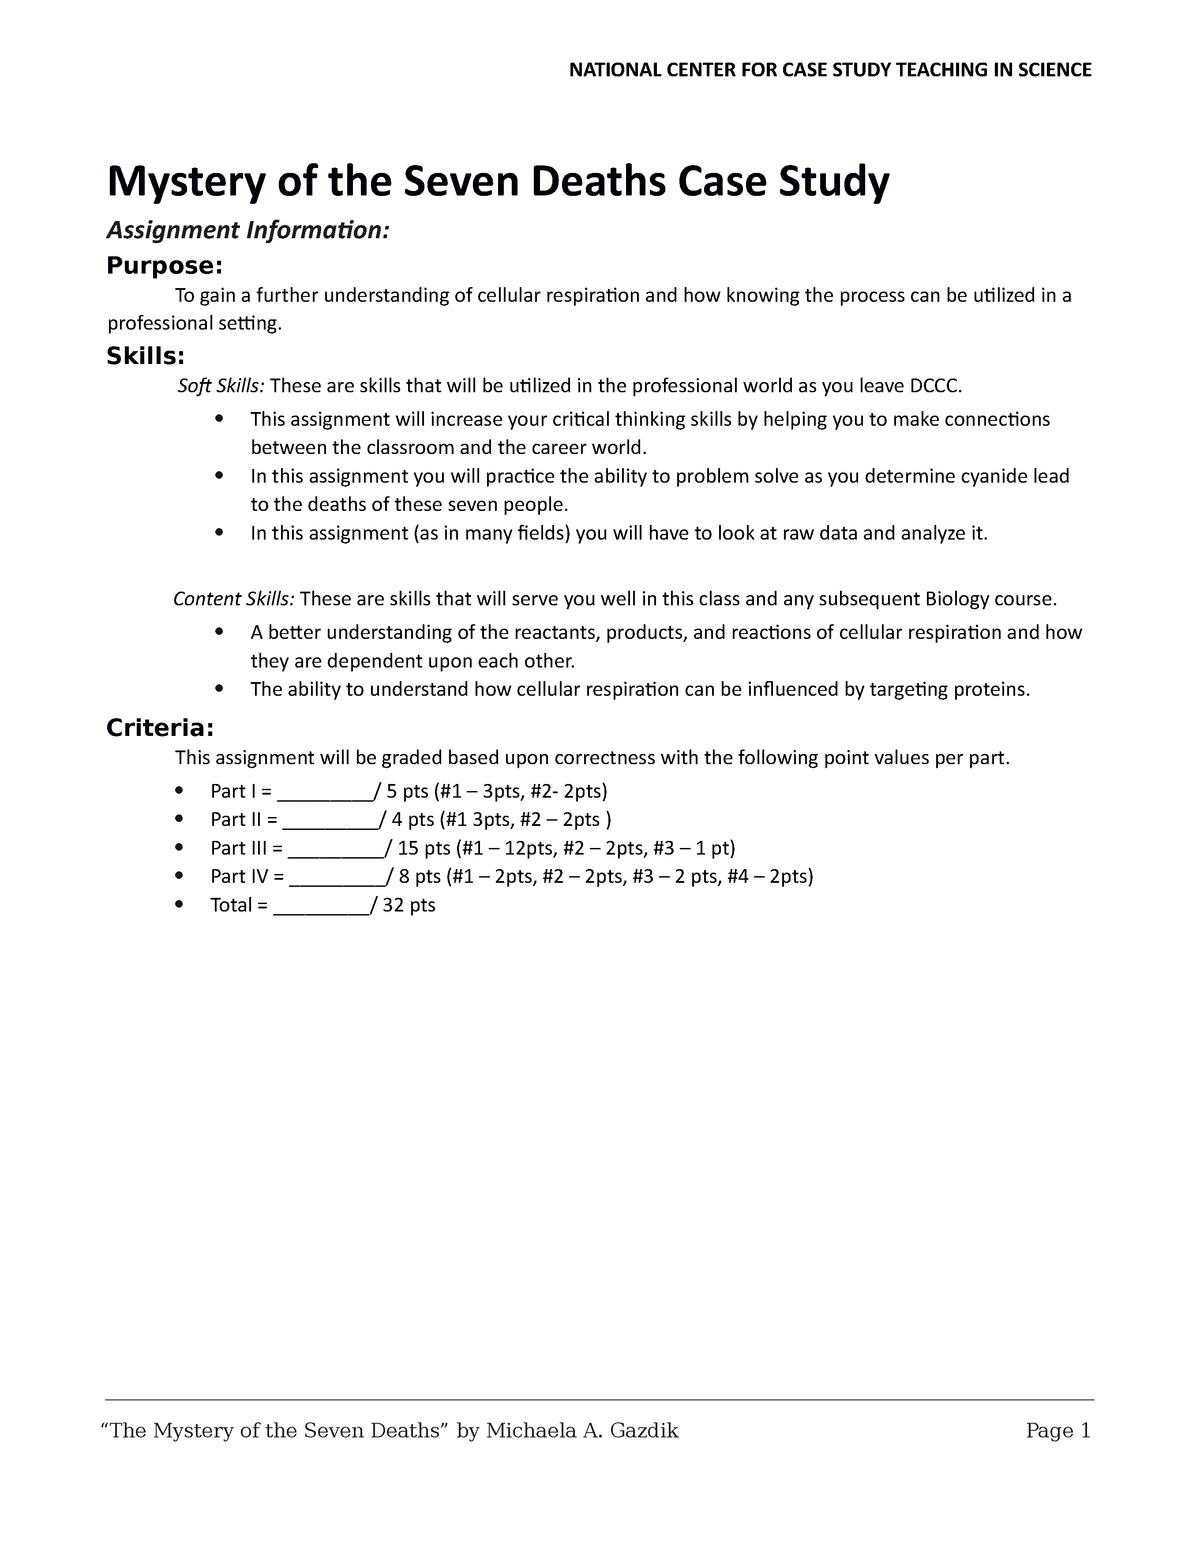 the mystery of the seven deaths case study quizlet